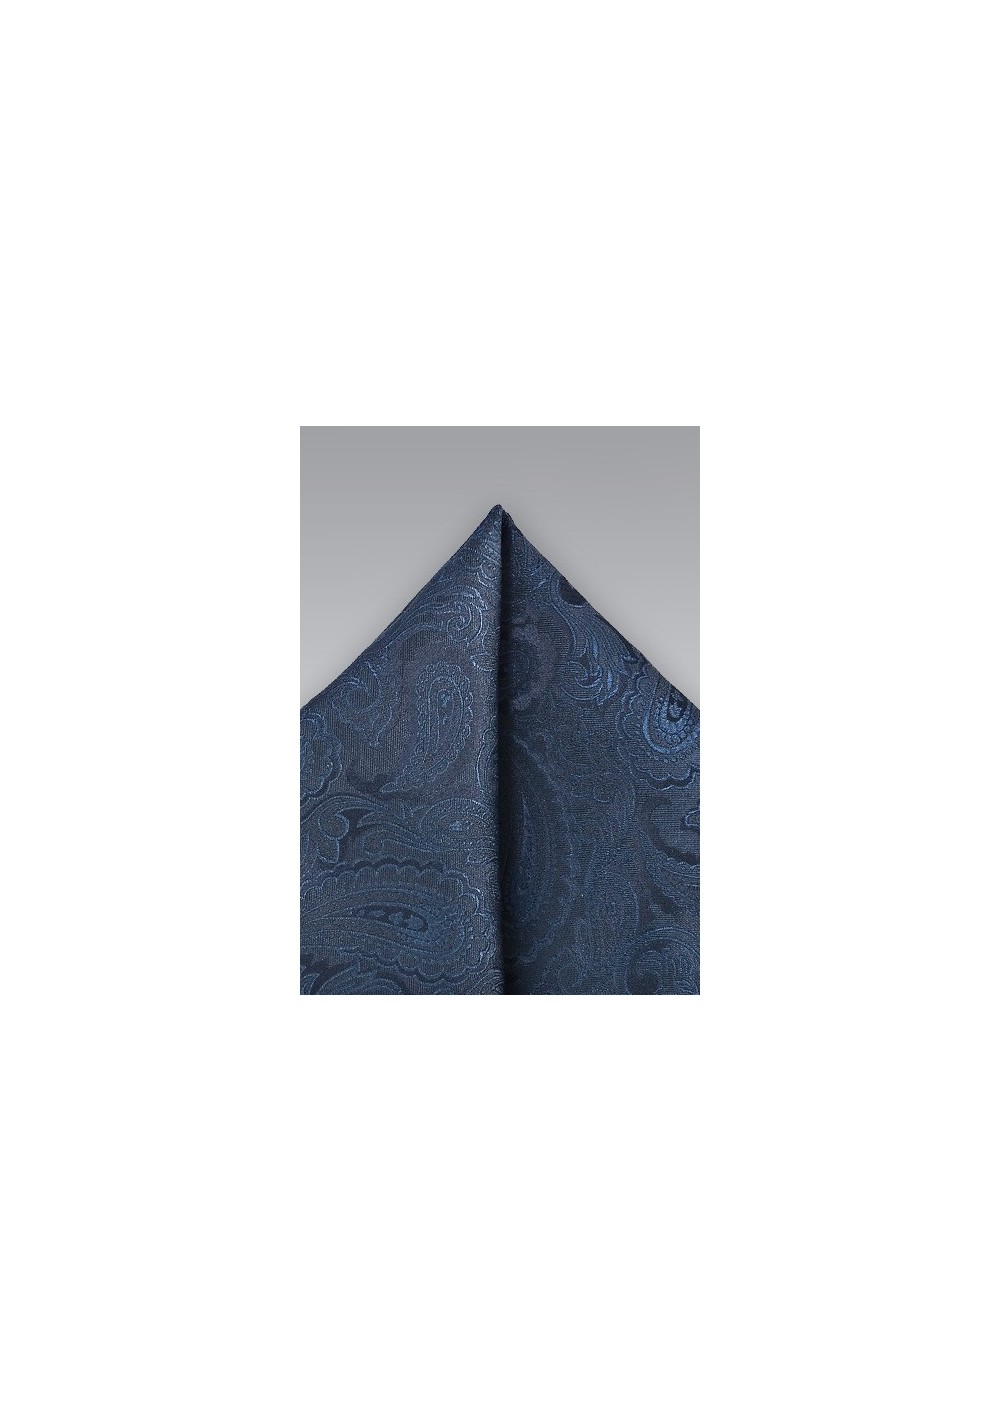 Paisley Patterned Pocket Square  in Dark Blues